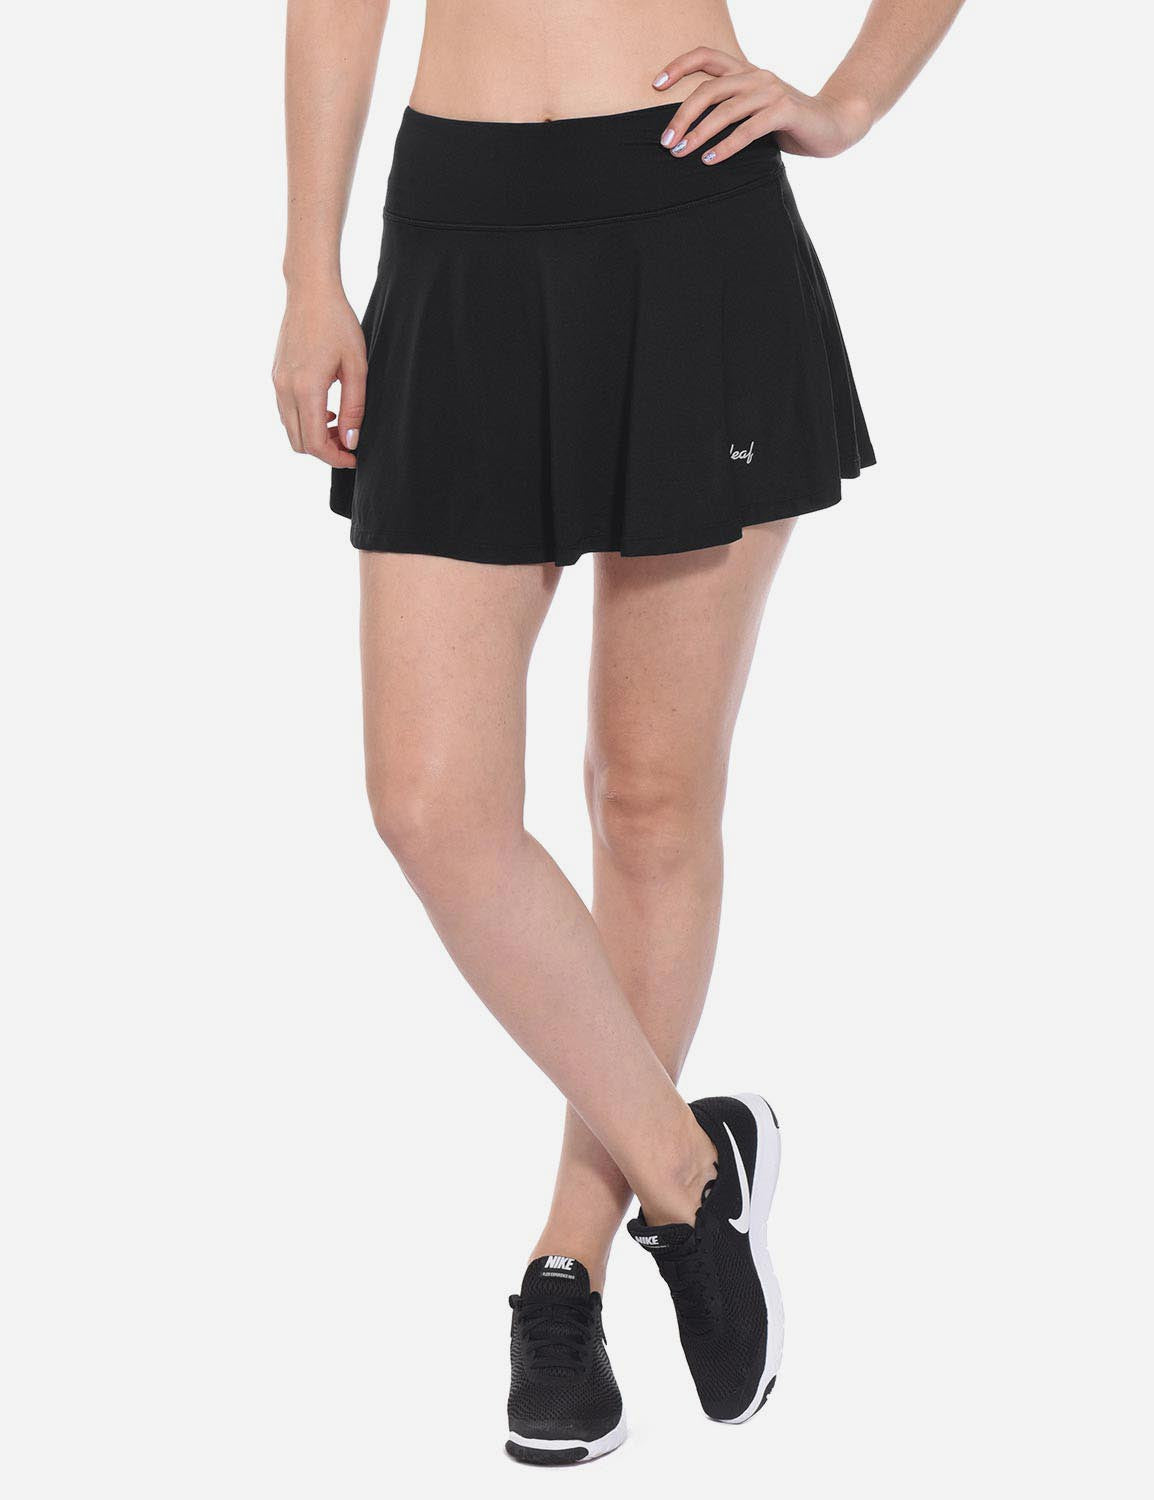 Baleaf Women's Mid-Rise 2-in-1 Pleated Pocketed Sports Skirt abd247 Black Main